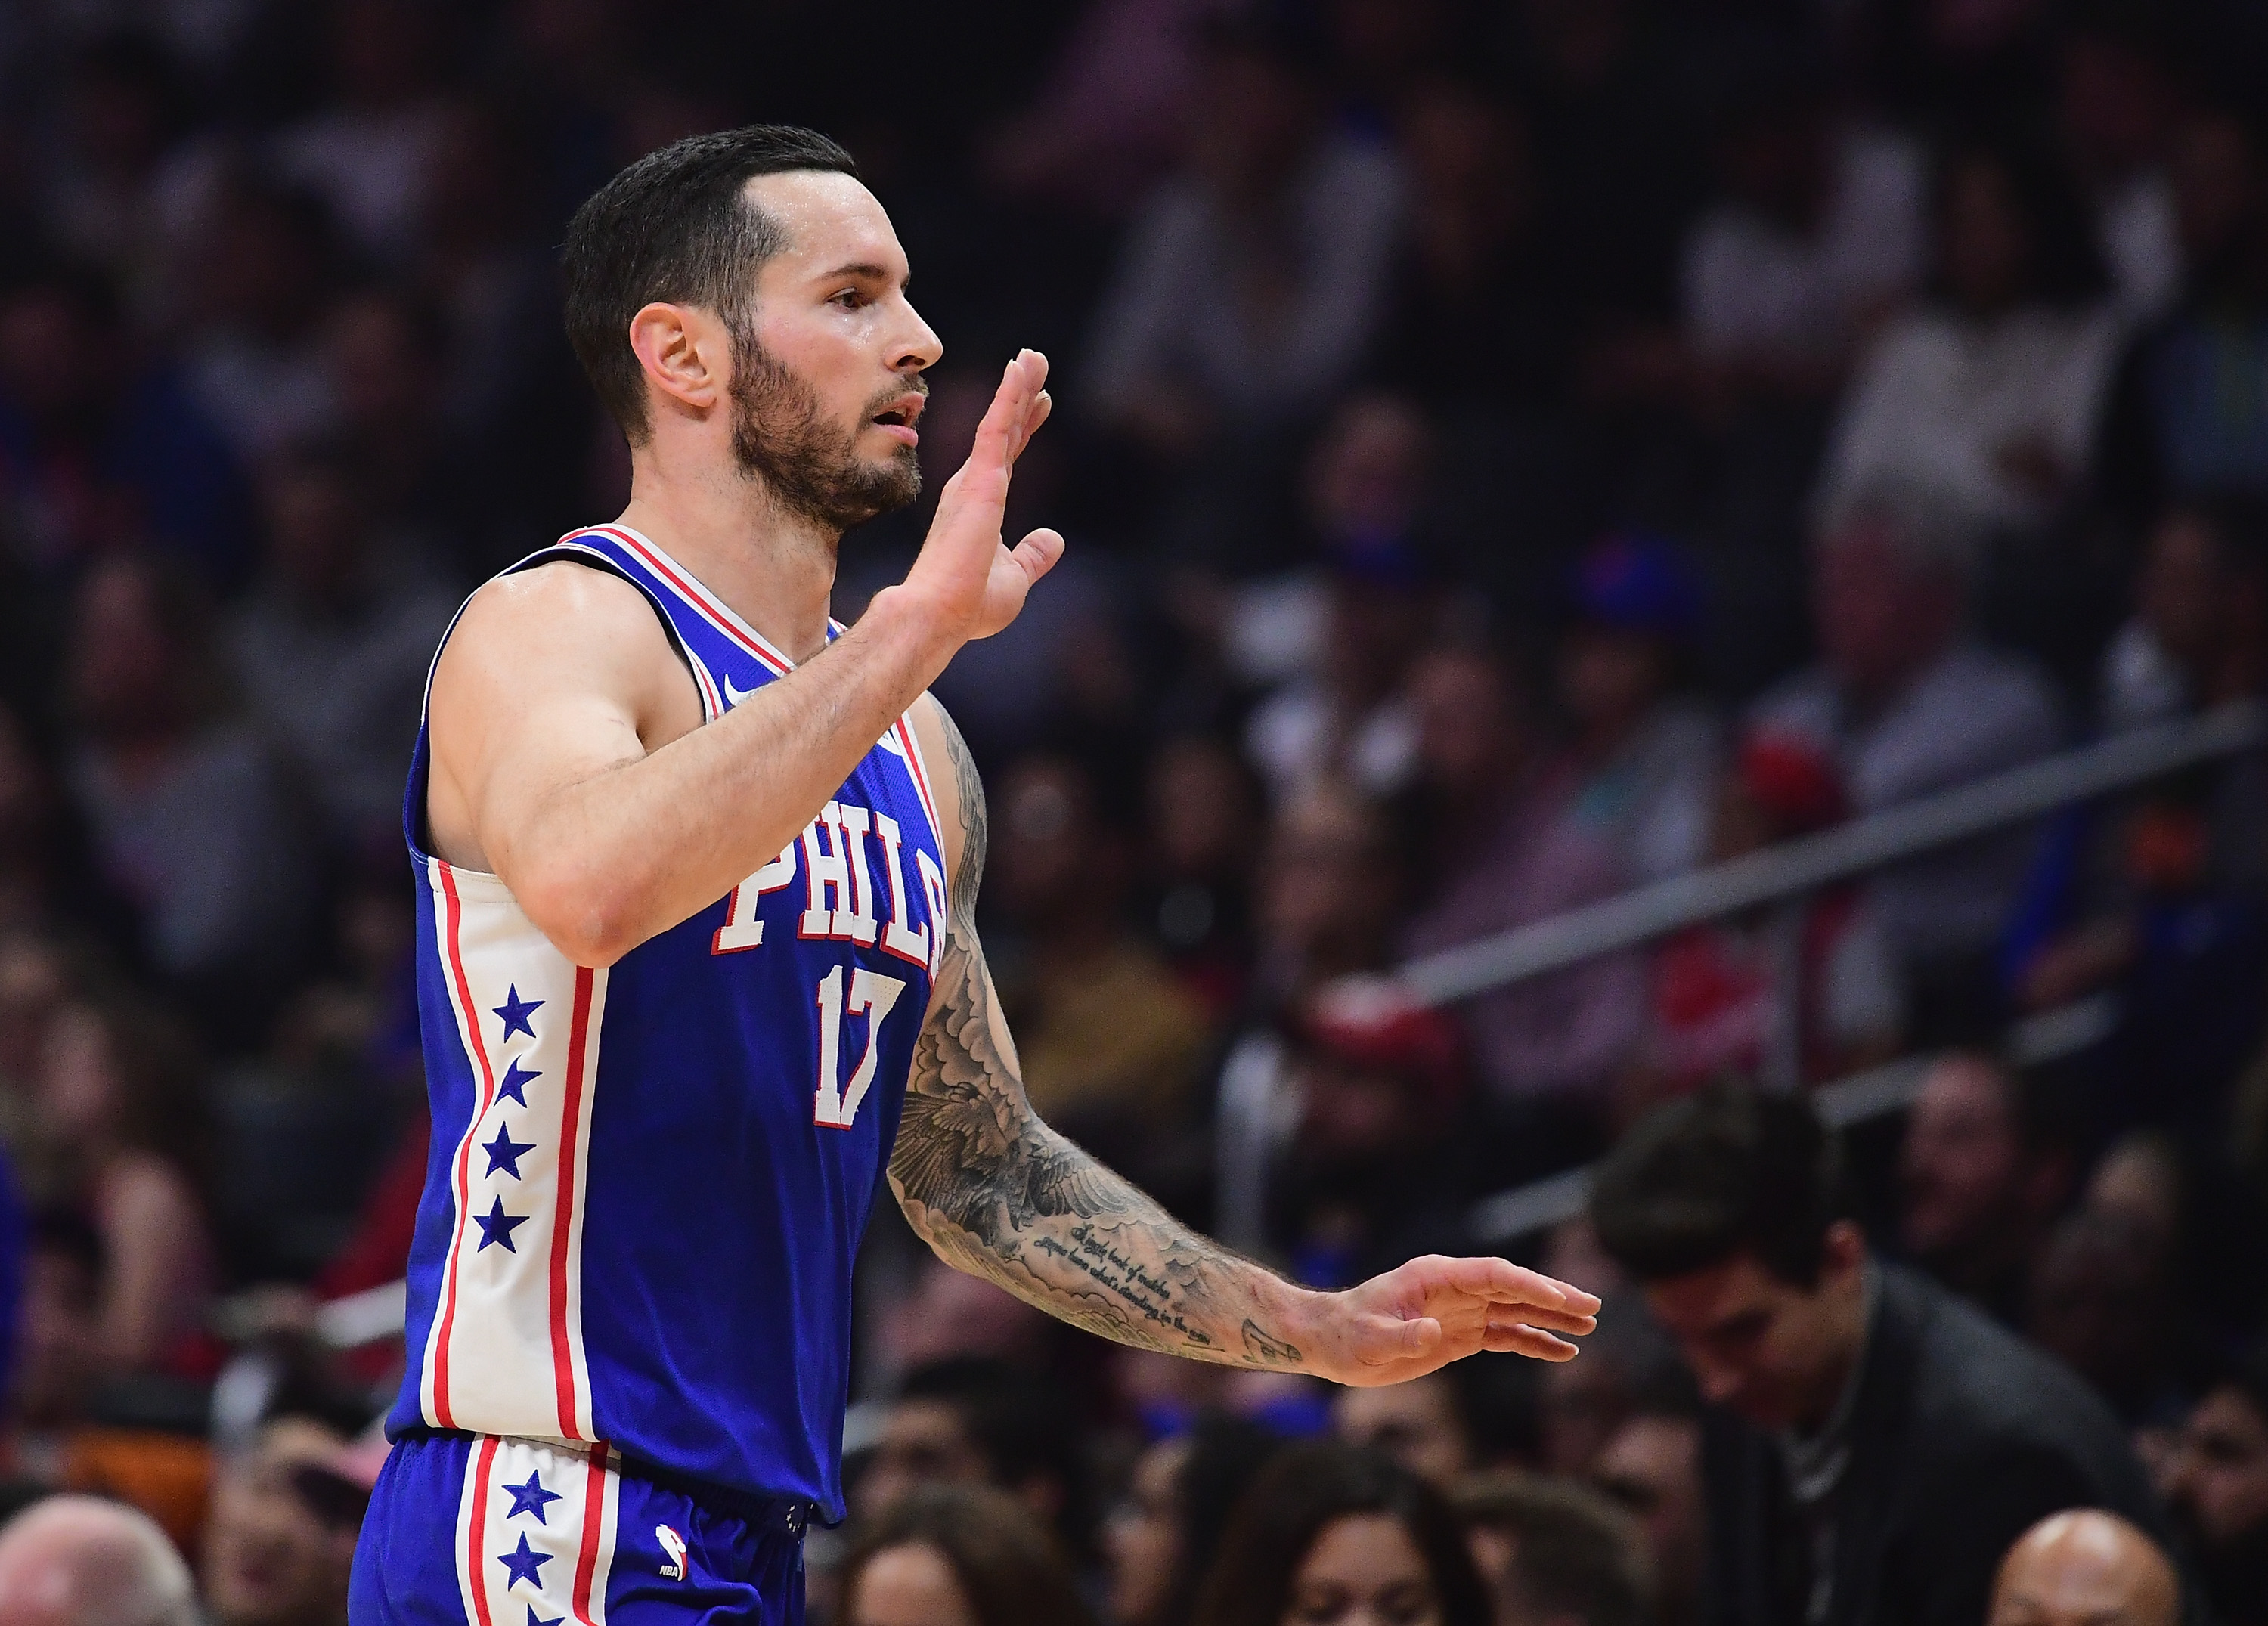 What is JJ Redick's net worth?